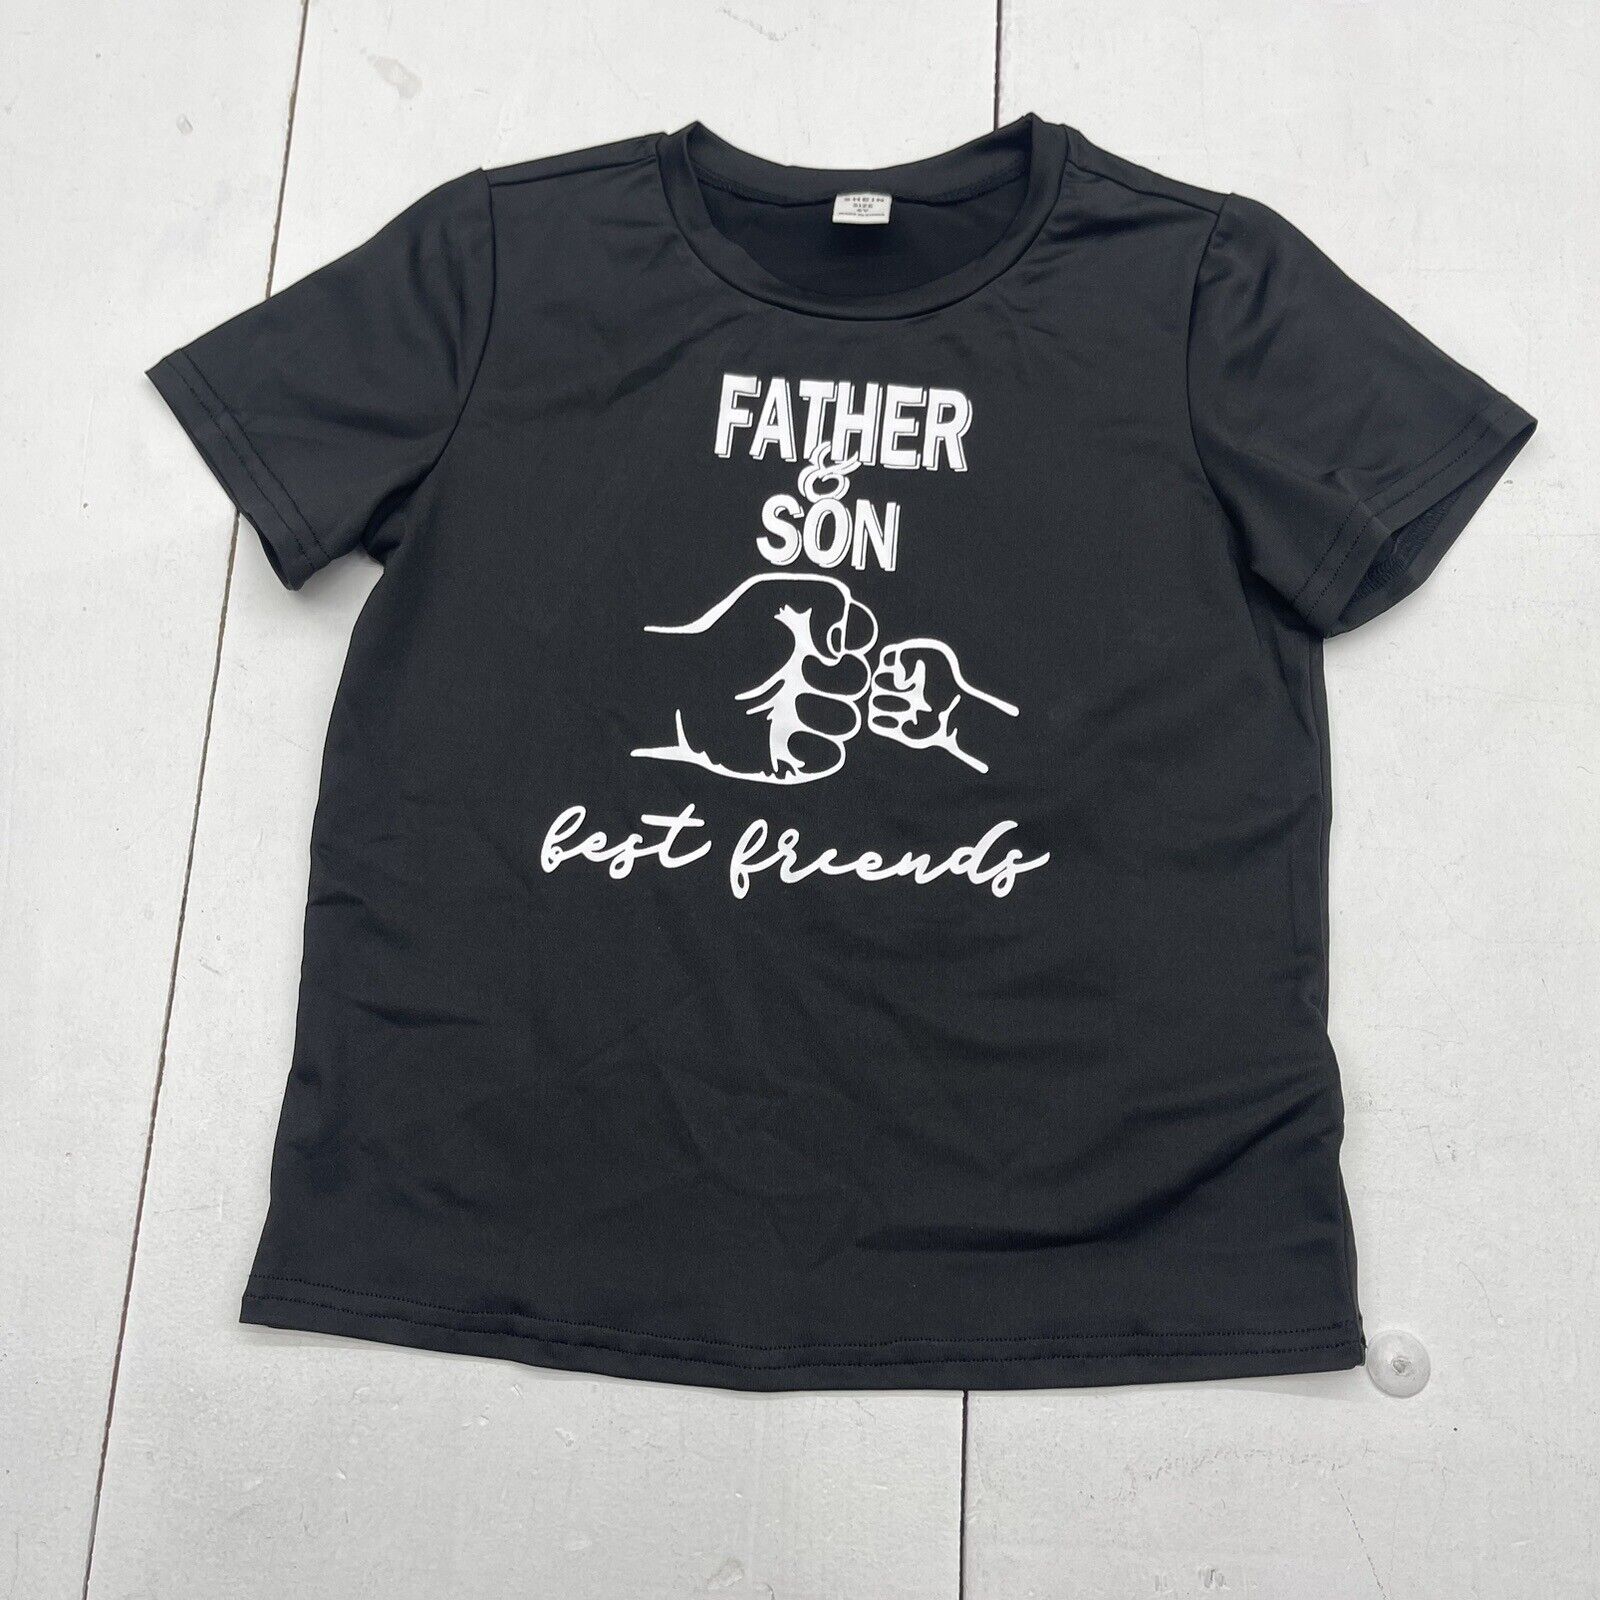 Shein Black Father & Son Graphic T Shirt Youth Boys Size 6